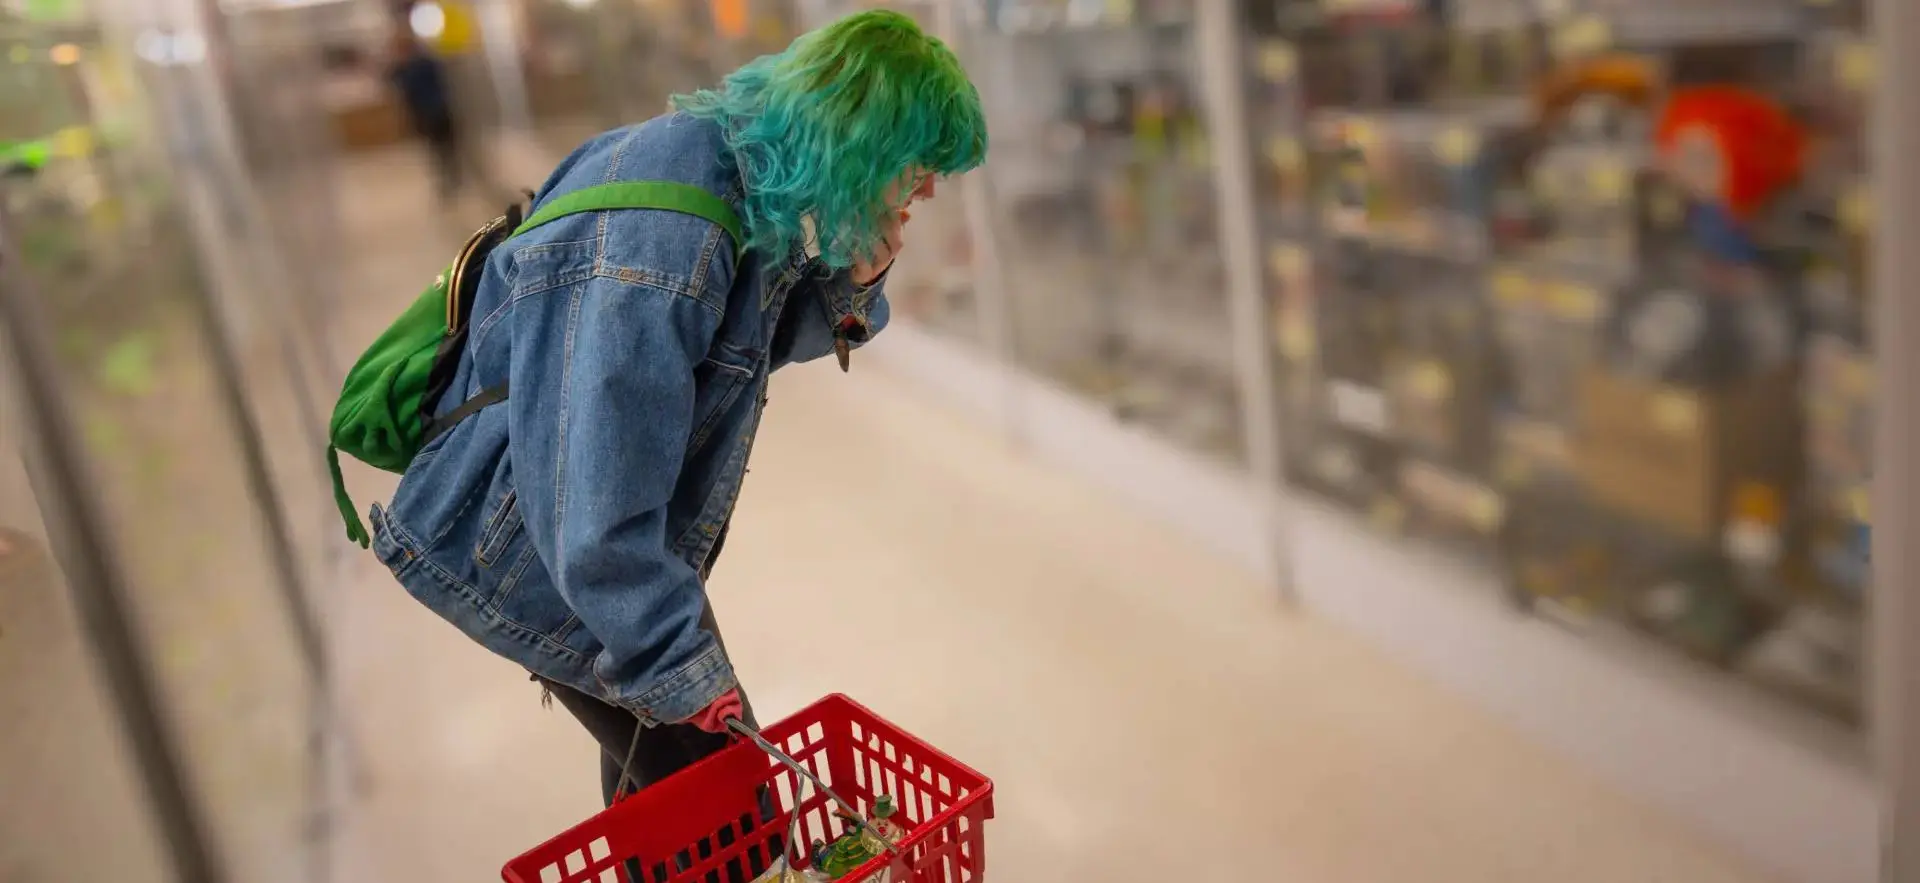 A person with blue hair is pushing a cart